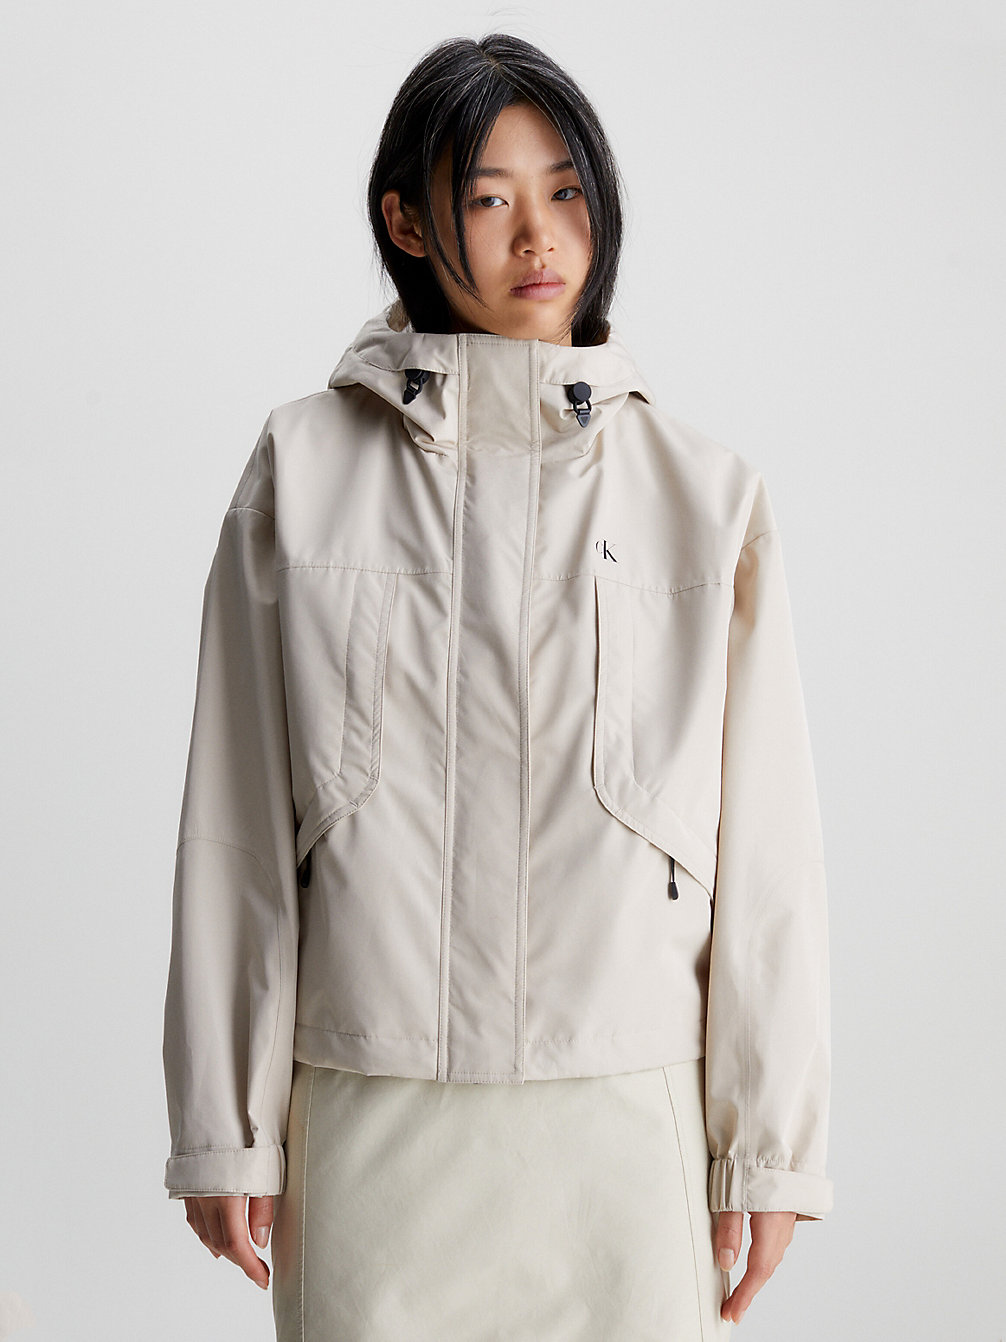 Chaqueta Impermeable Oversized > CLASSIC BEIGE > undefined mujer > Calvin Klein